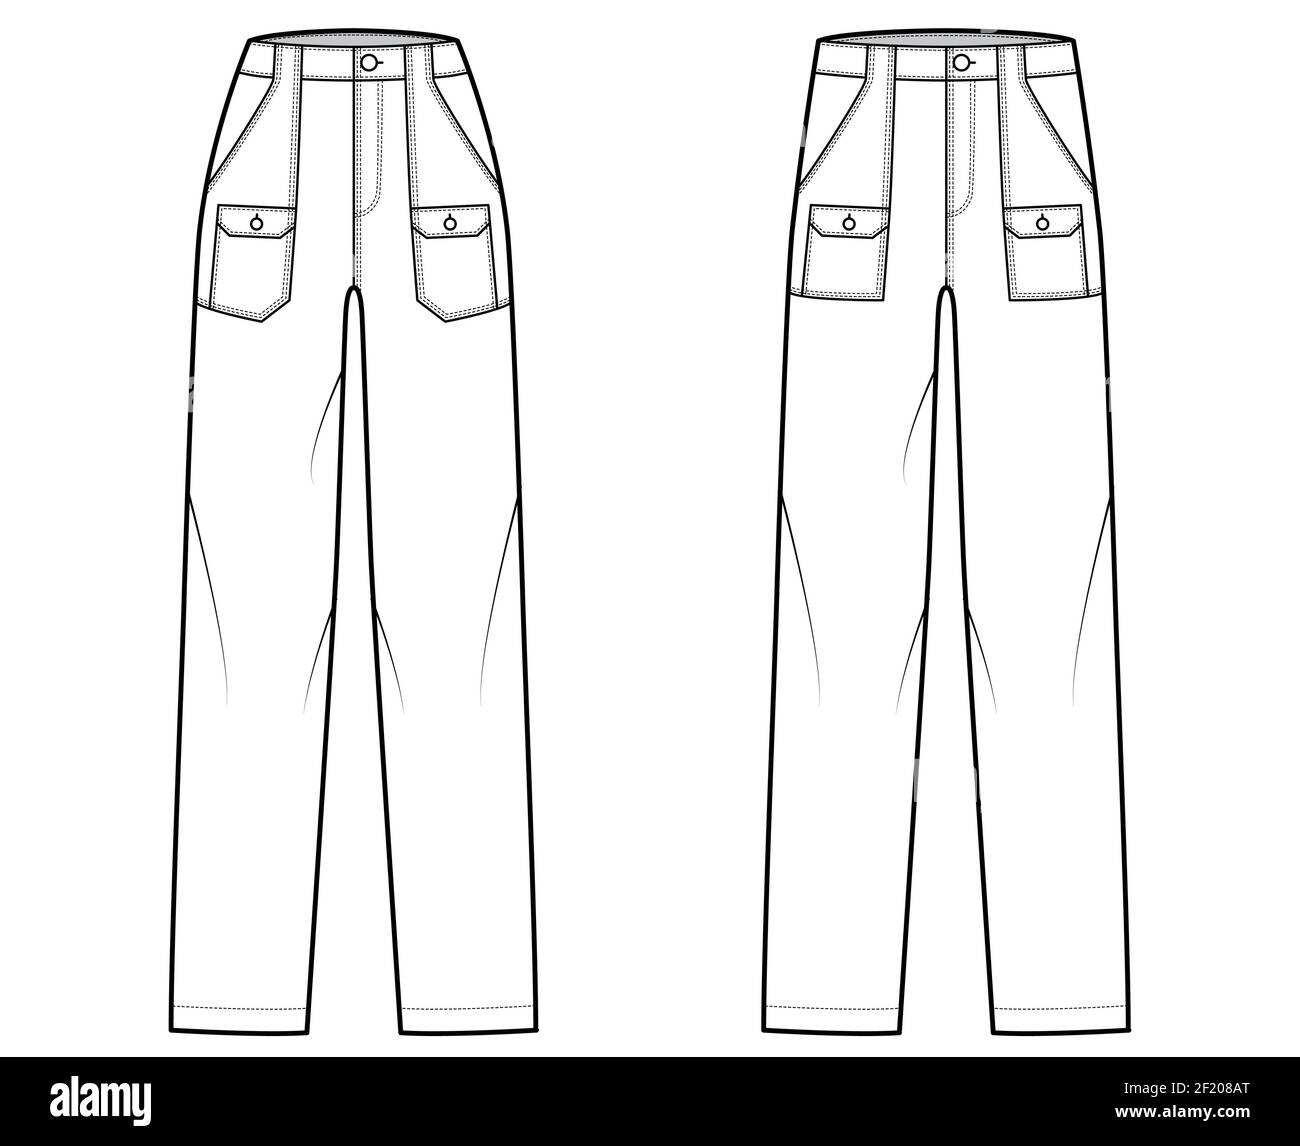 Cargo pants pants technical drawing Stock Vector Images - Alamy